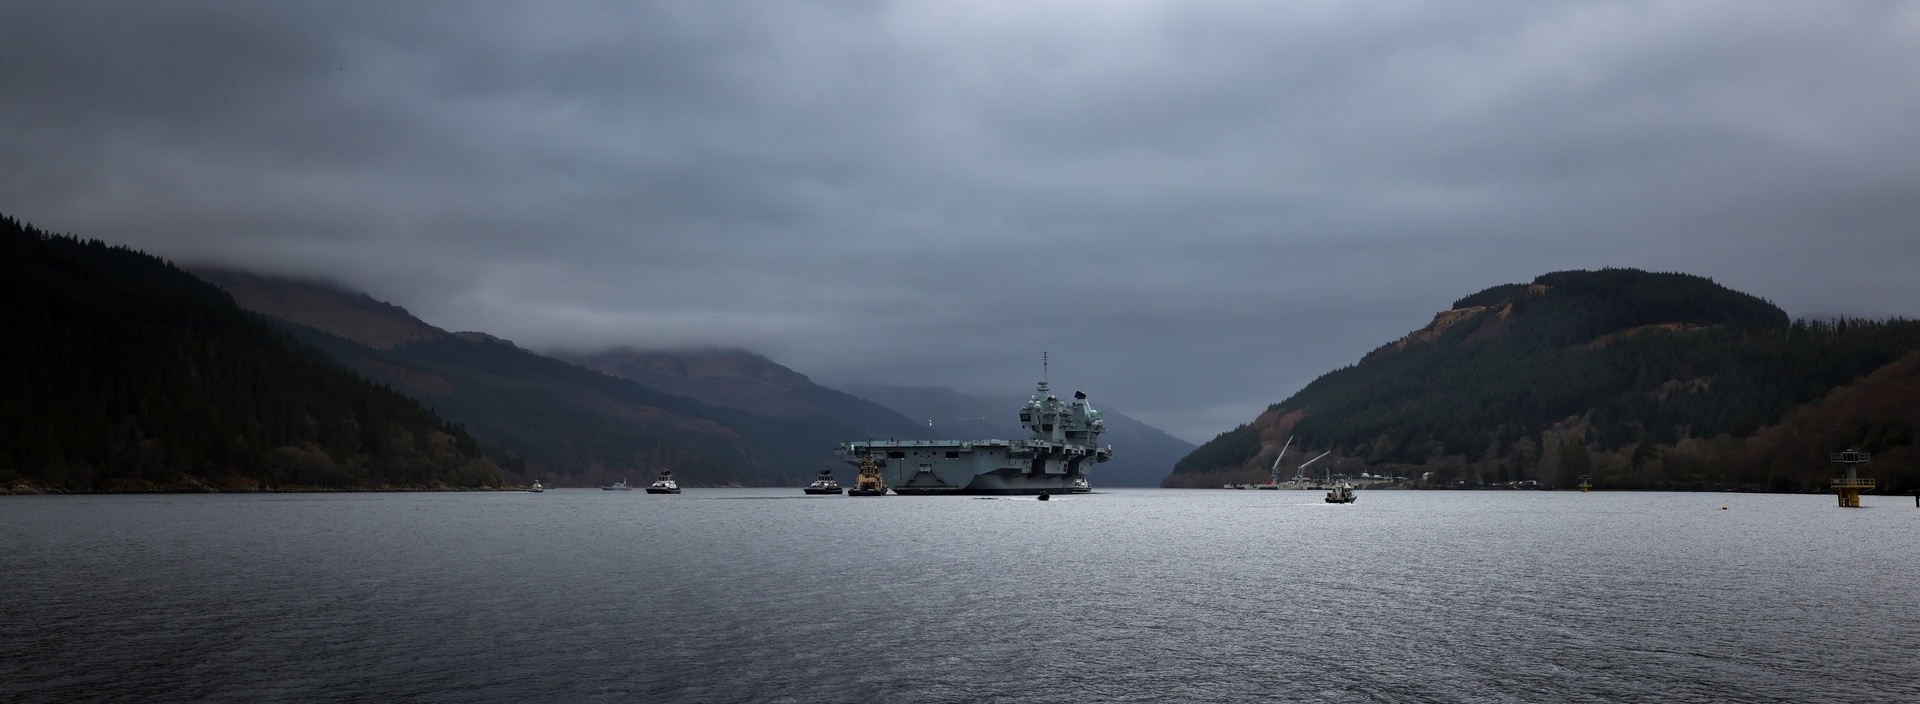 The giant, 65,000 tonne carrier was last seen on the Clyde in March last year when it sailed to Loch Long to be loaded with ammunition ahead of her successful deployment with the Carrier Strike Group.